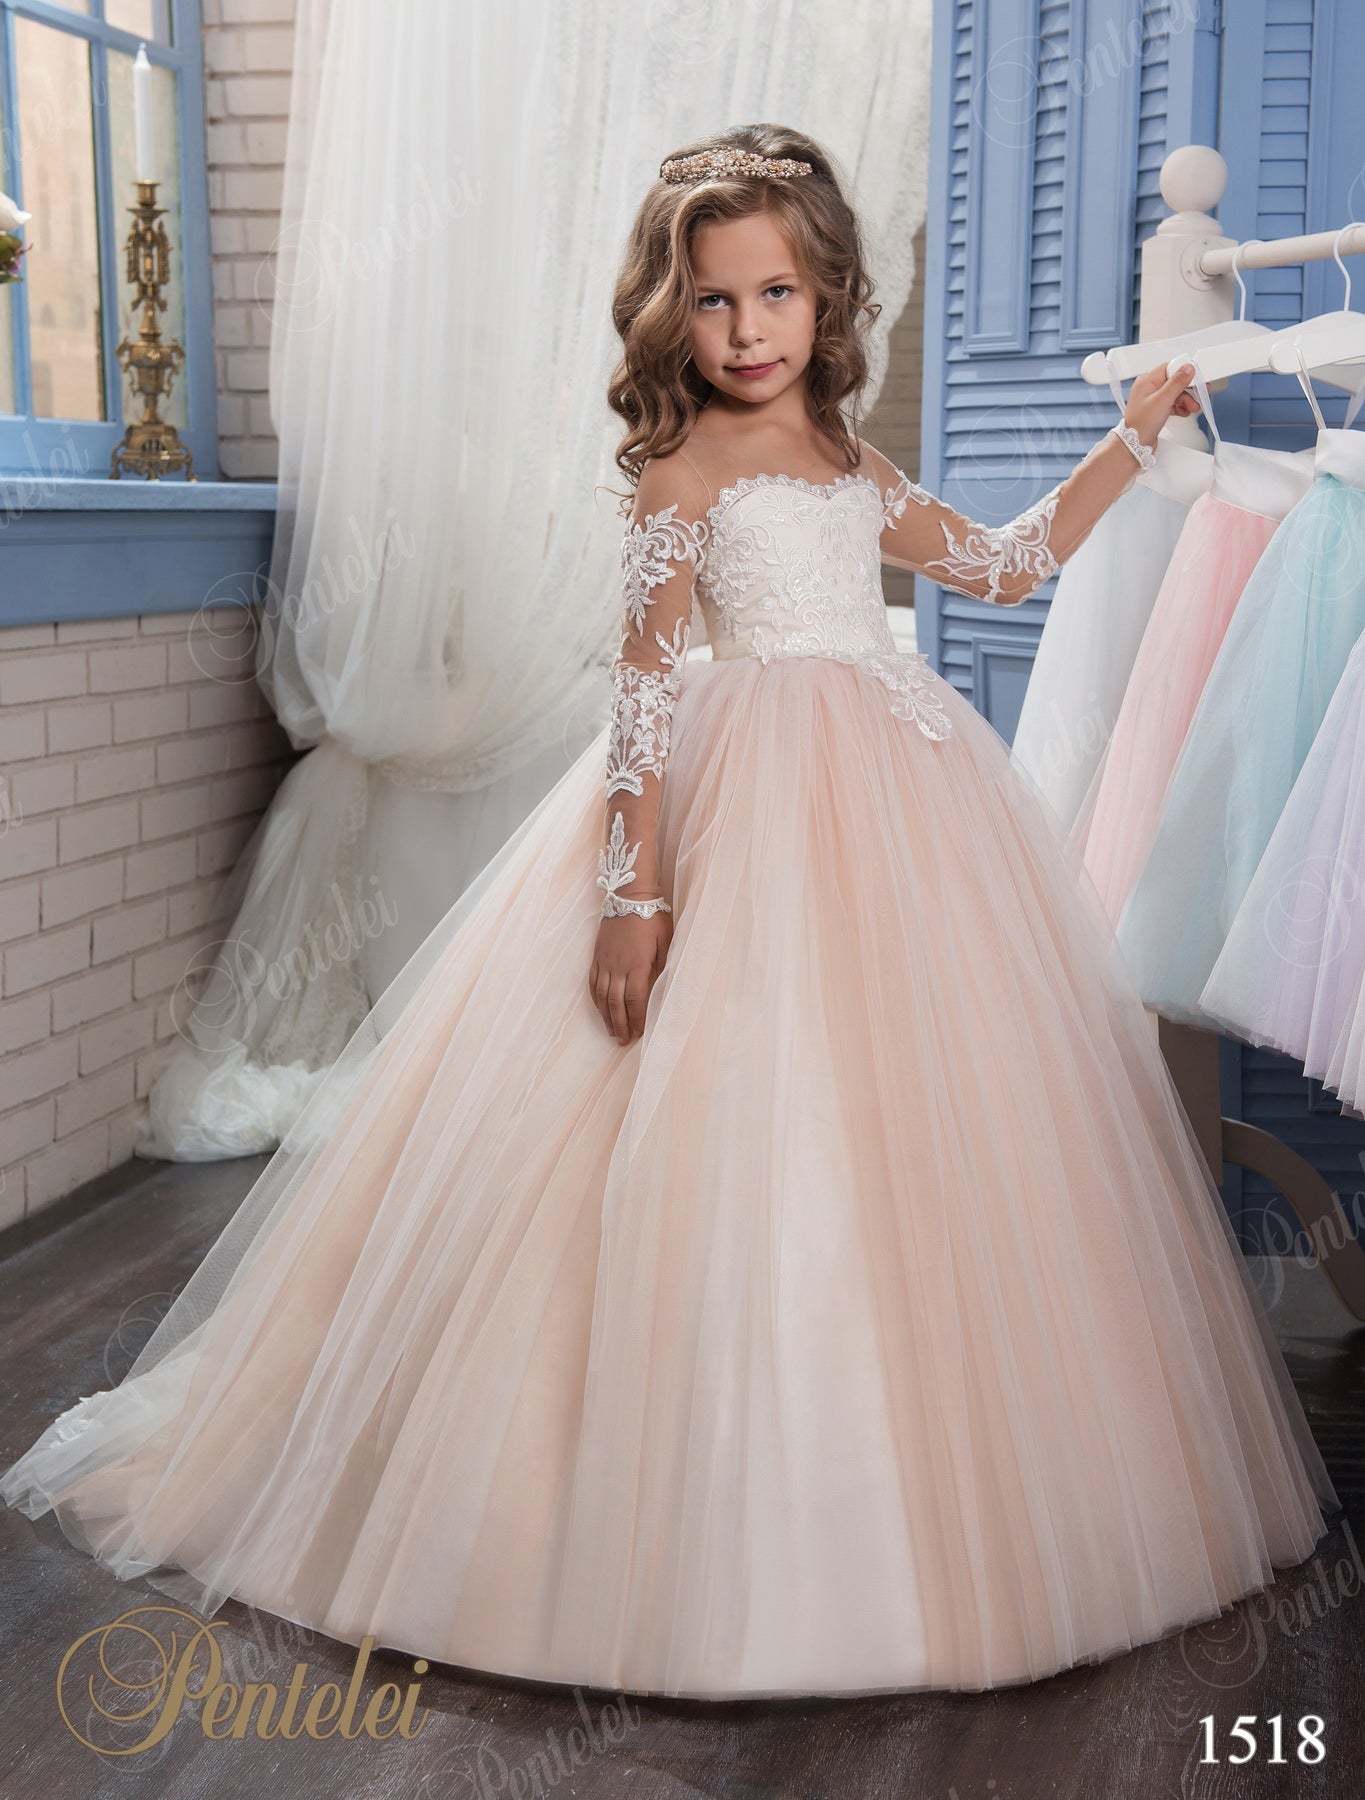 Authentic 1518 Long Sleeves Lace and Tulle Flower Girl Dress – Sparkly Gowns